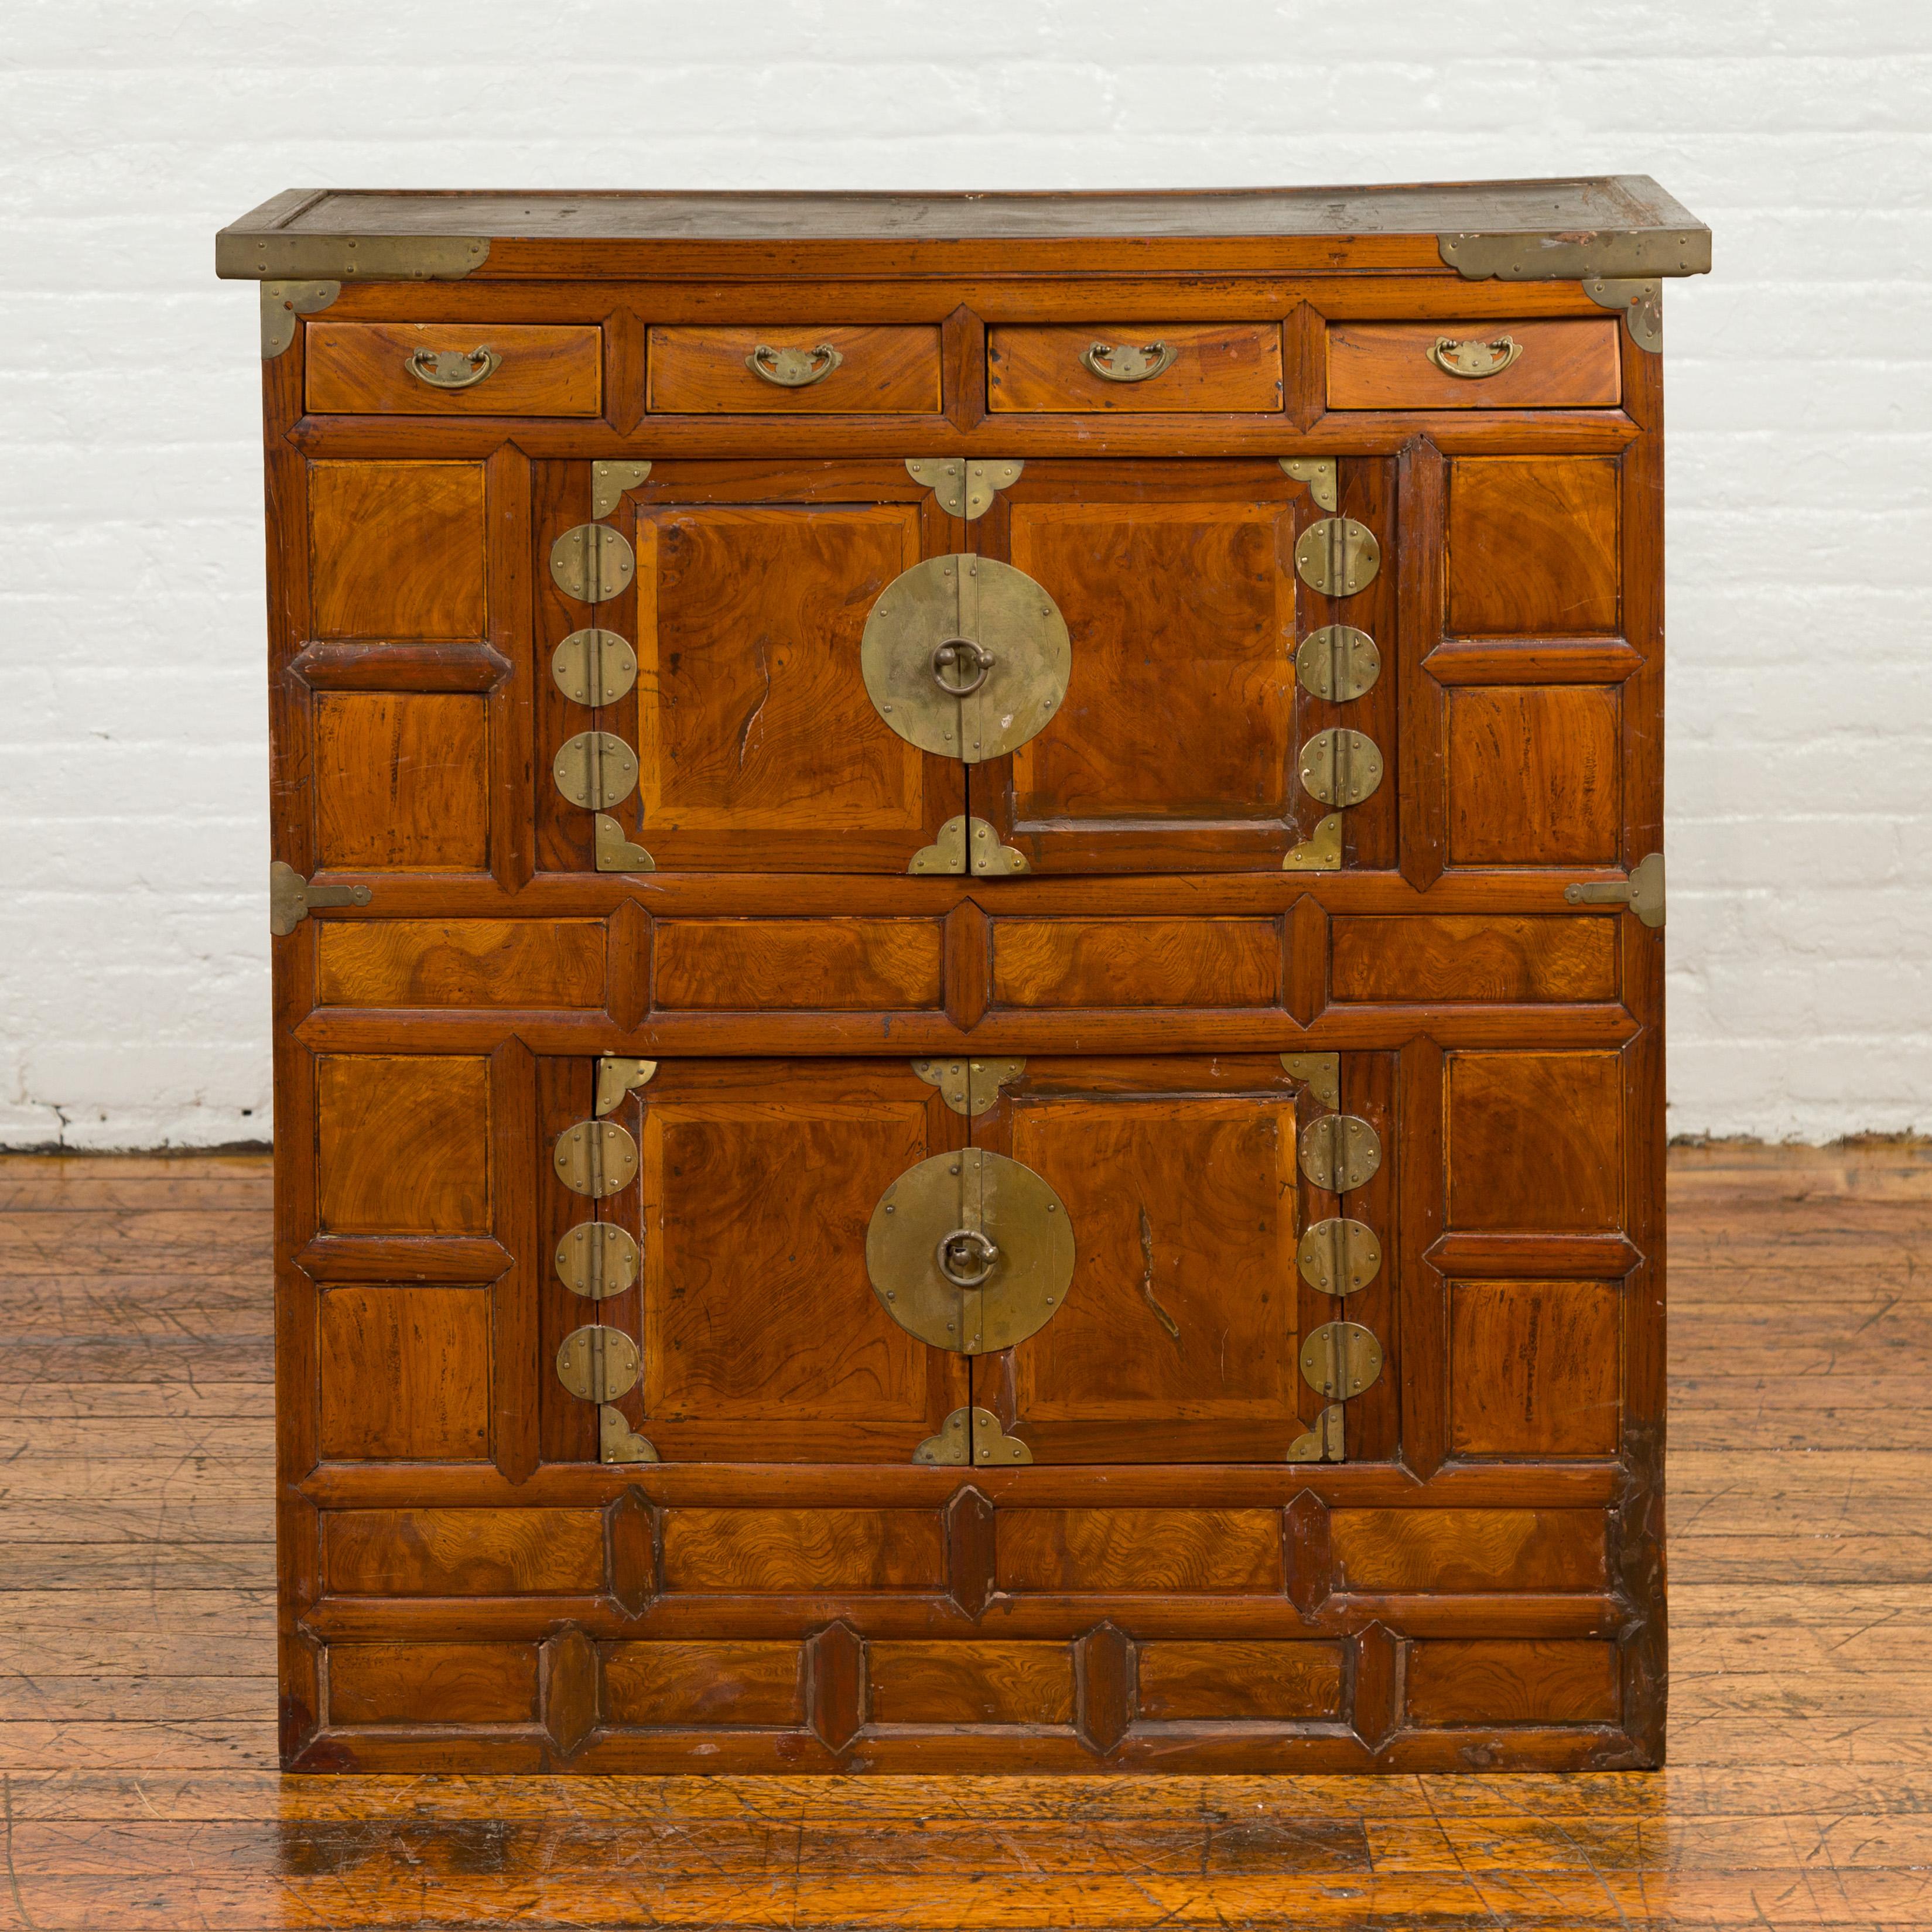 A Korean wooden cabinet from the 19th century, with four drawers, two sets of double doors and brass hardware. Born in Korea during the 19th century, this cabinet features a rectangular top with slightly recessed central panel, sitting above a